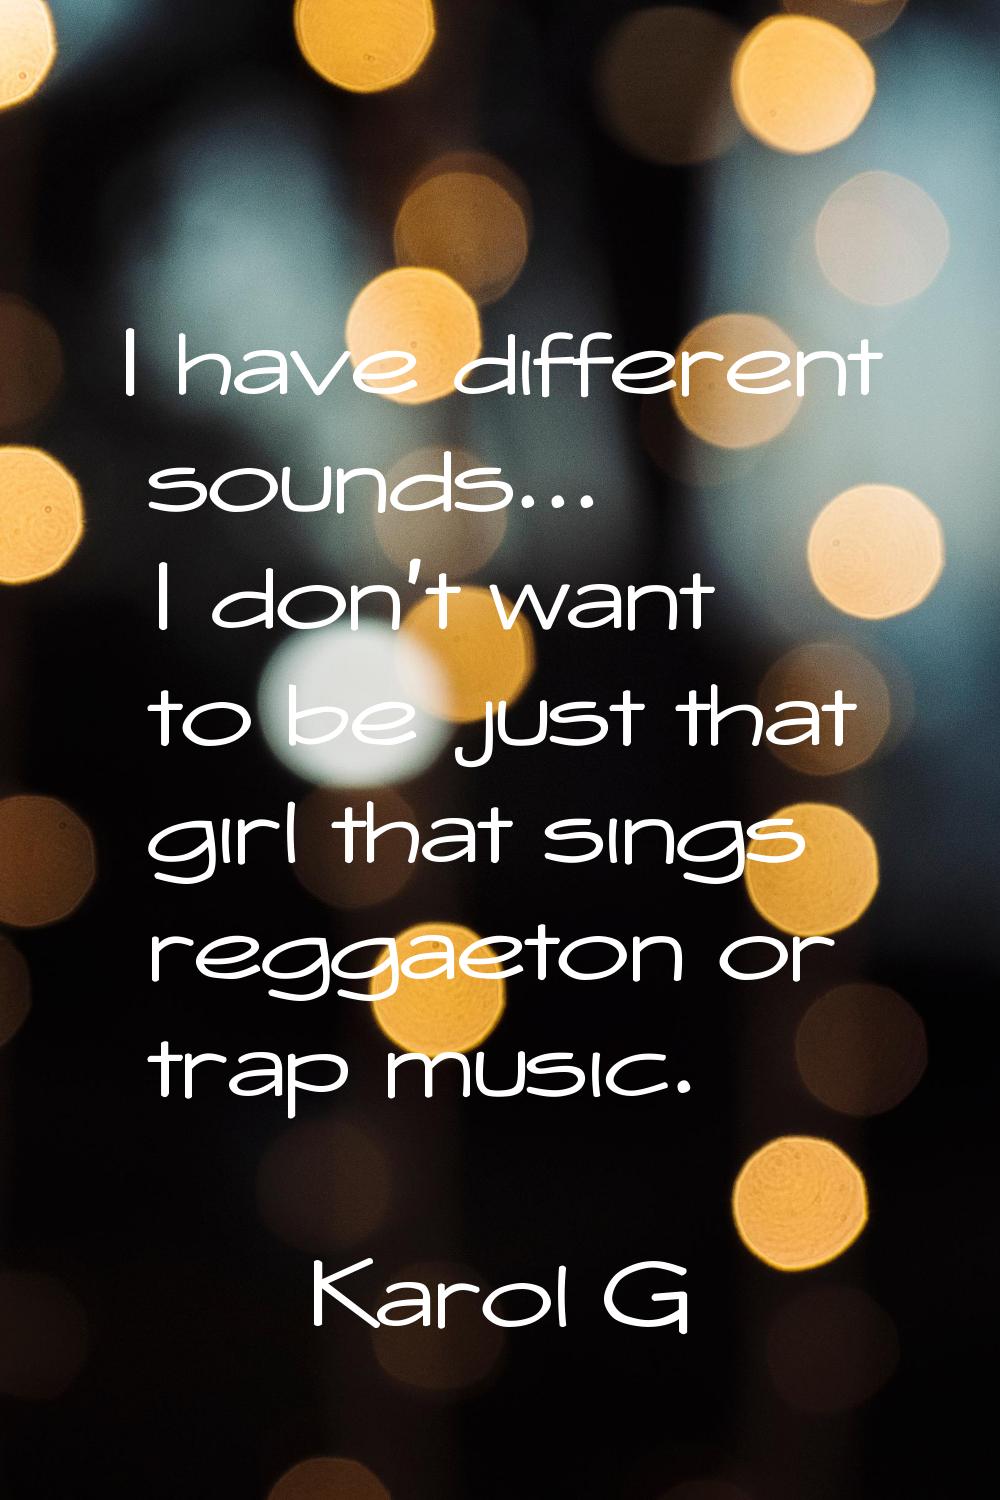 I have different sounds... I don't want to be just that girl that sings reggaeton or trap music.